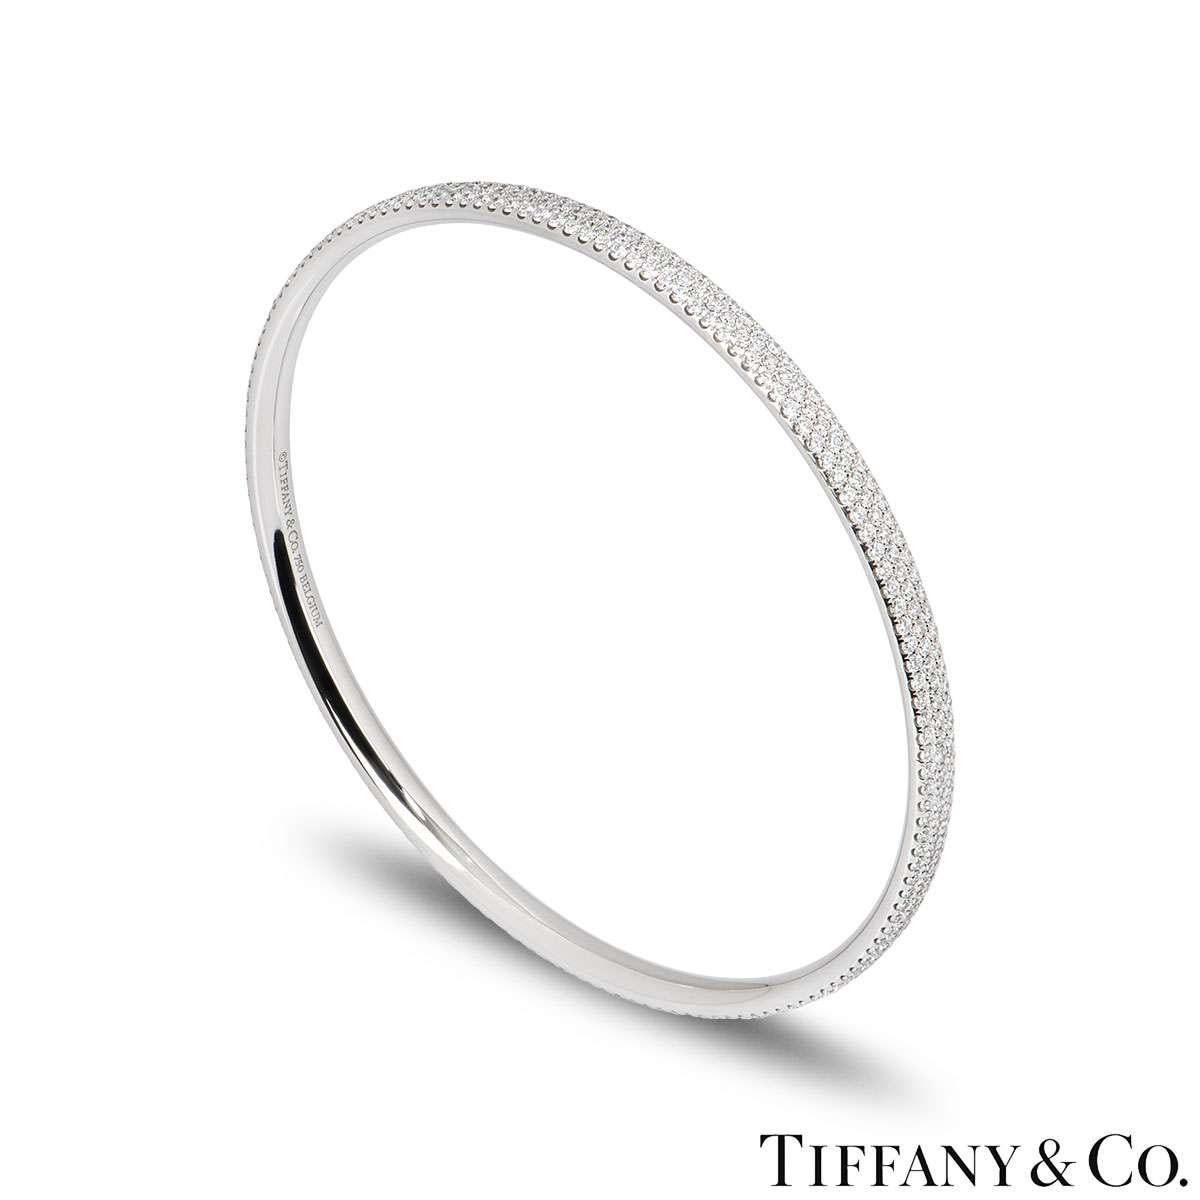 An elegant 18k white gold diamond bangle by Tiffany & Co. The bangle features three rows of pave set round brilliant cut diamonds. The bangle measures 6.9cm in diameter and has a gross weight of 21.8 grams.

The bangle comes complete with a